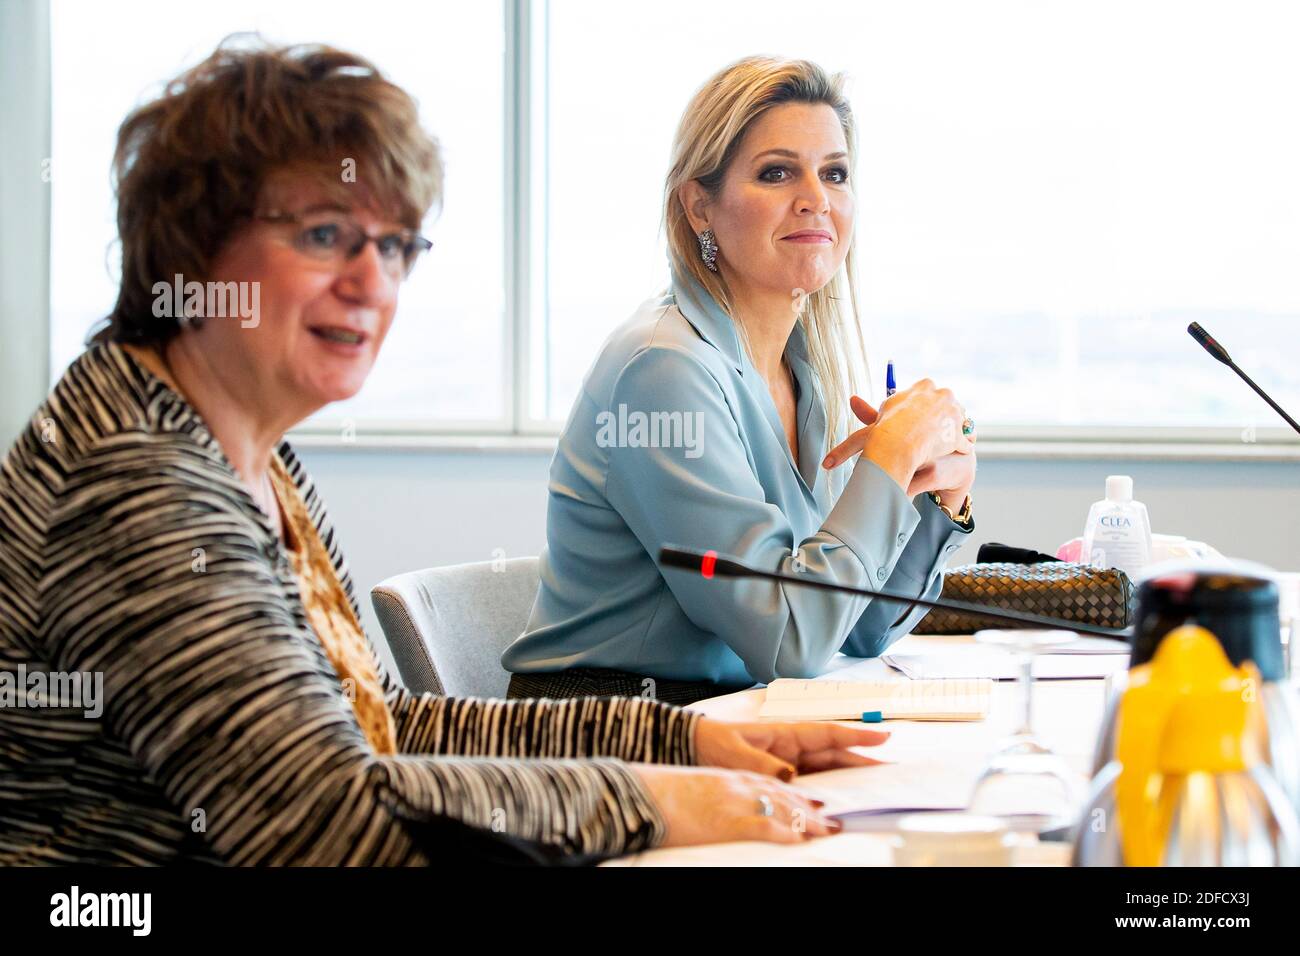 Queen Maxima of the Netherlands visits the Dutch employee insurances (UWV) in Amsterdam, 4 December 2020. Queen Maxima visits the UWV as member of the Dutch Committee for Entrepreneurship together with Mariette Hamer of the Social Ecomic Council. Photo: Patrick van Katwijk/ | Stock Photo